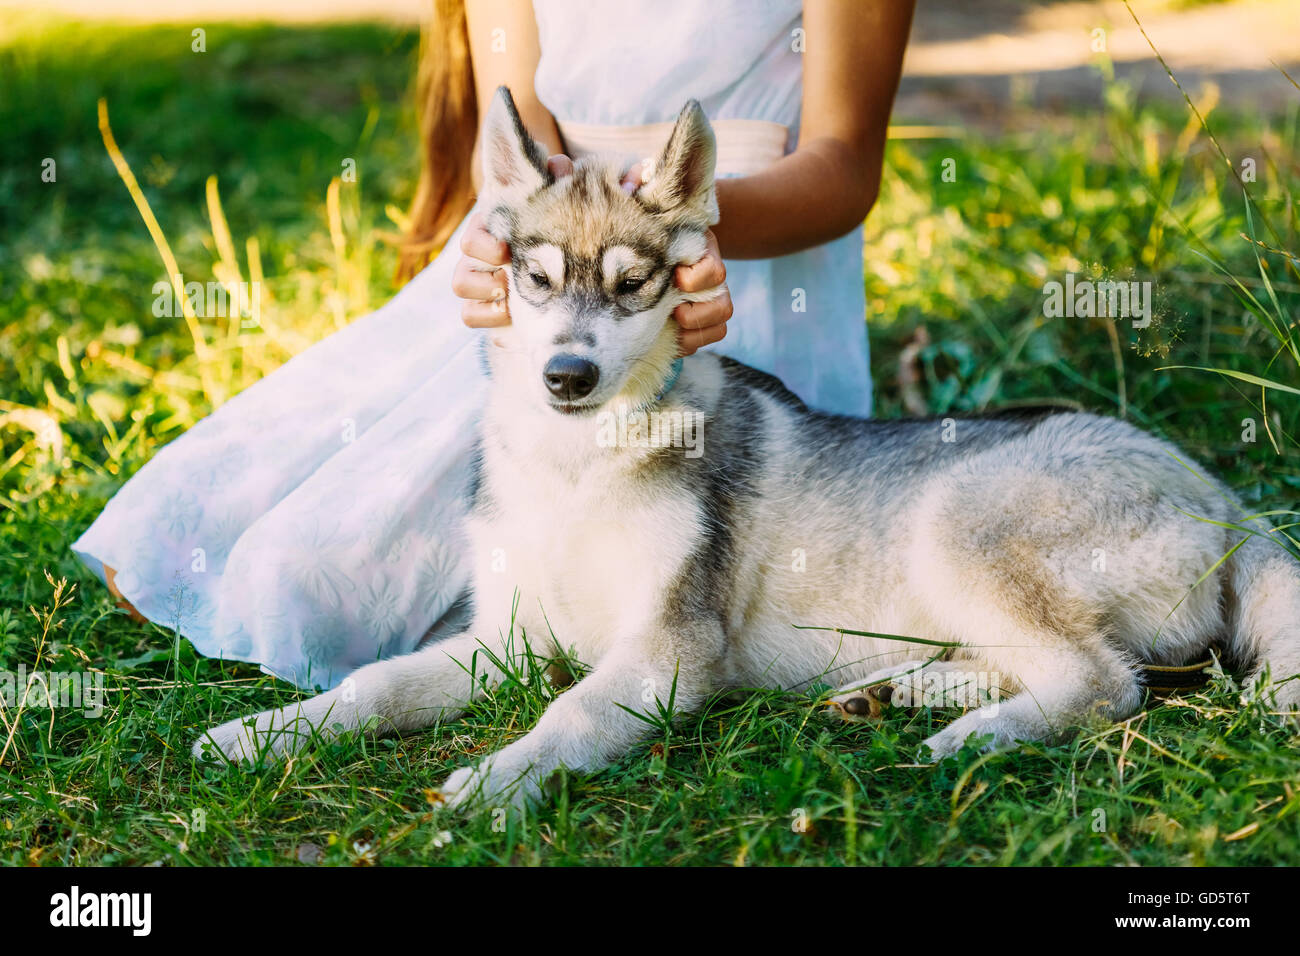 Little Girl in Dress And Her Puppy Dog Husky In Park In Summer Stock Photo